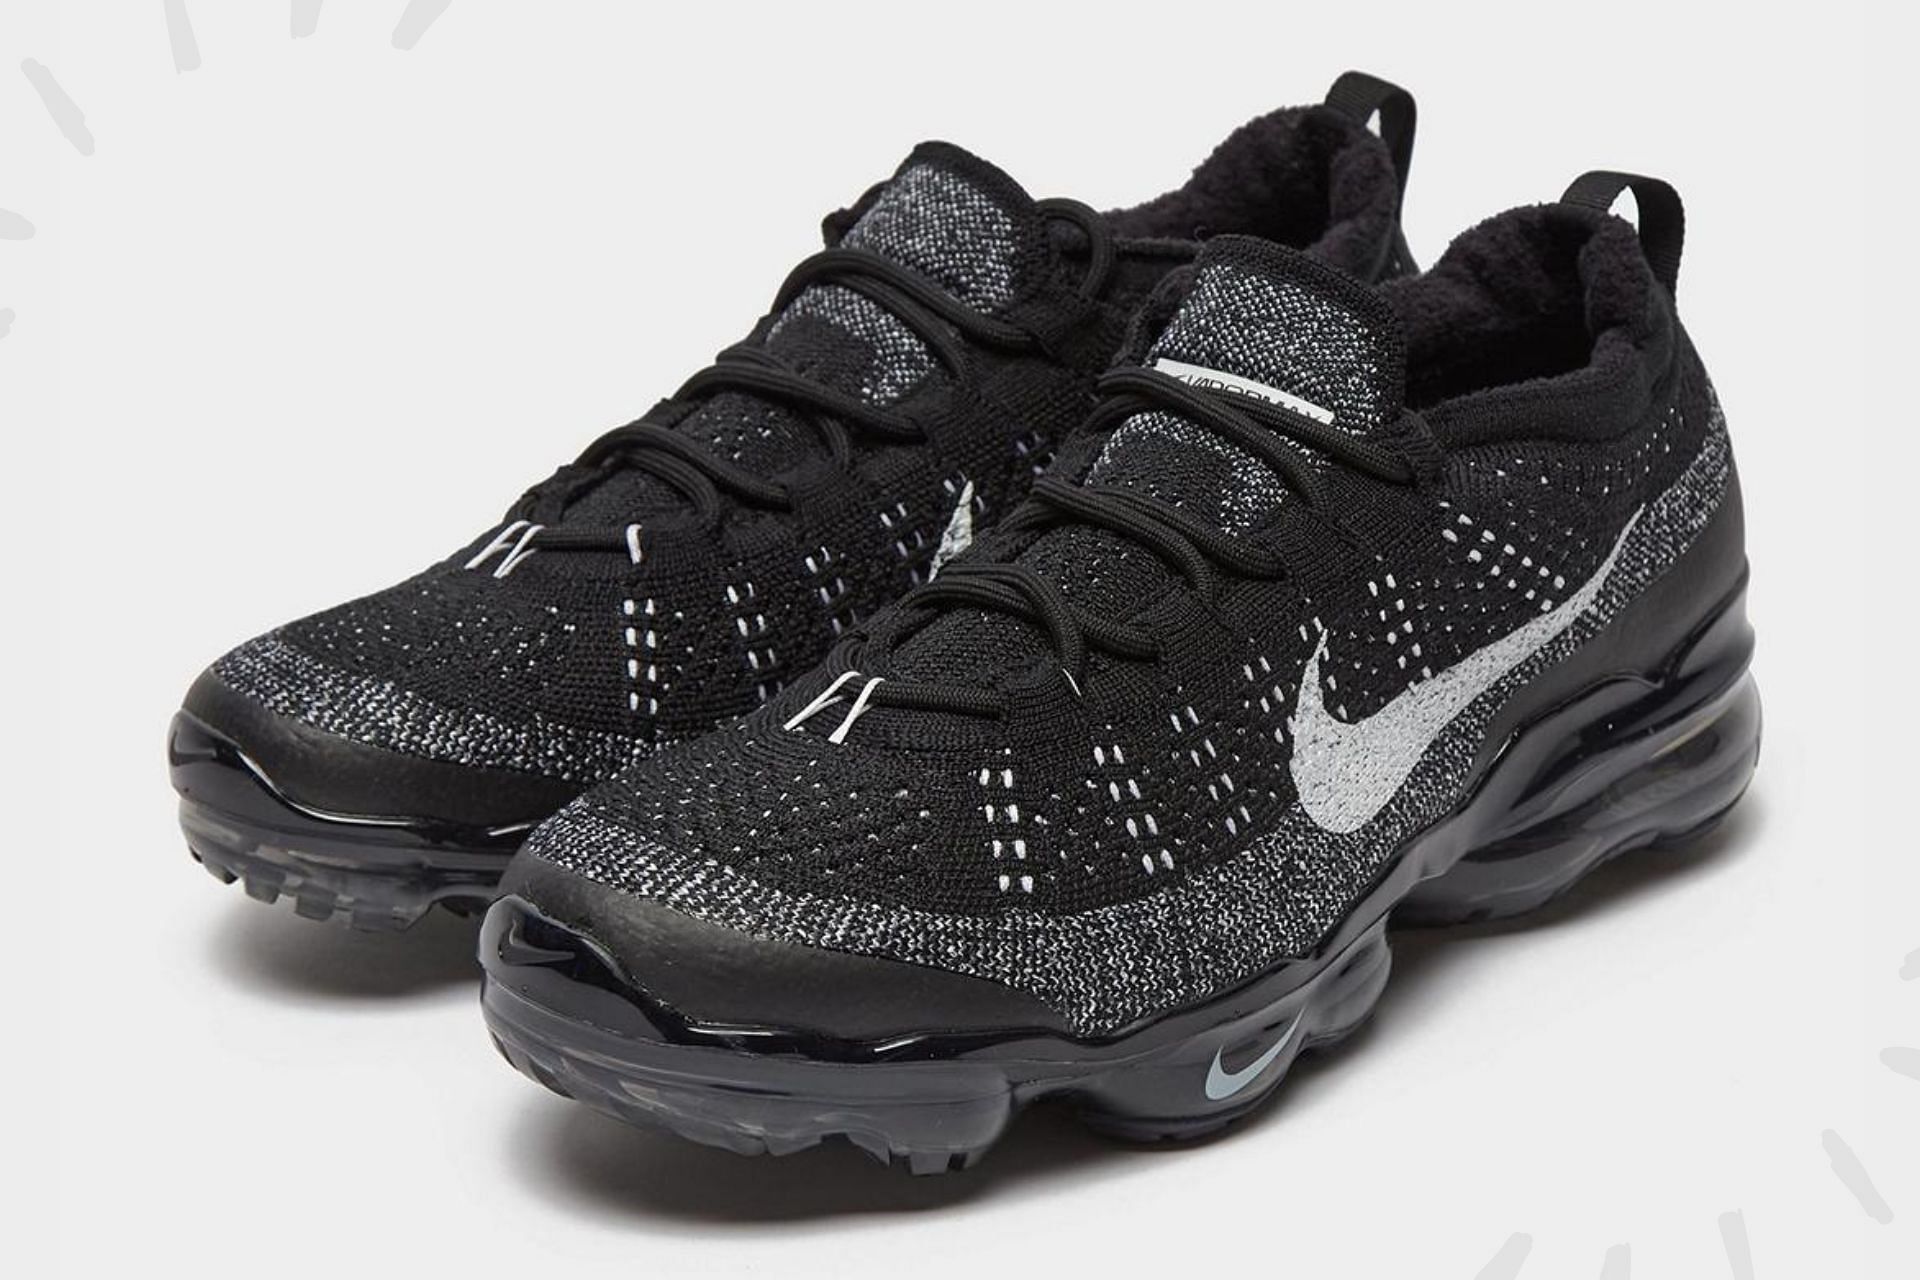 when did vapormax flyknit come out